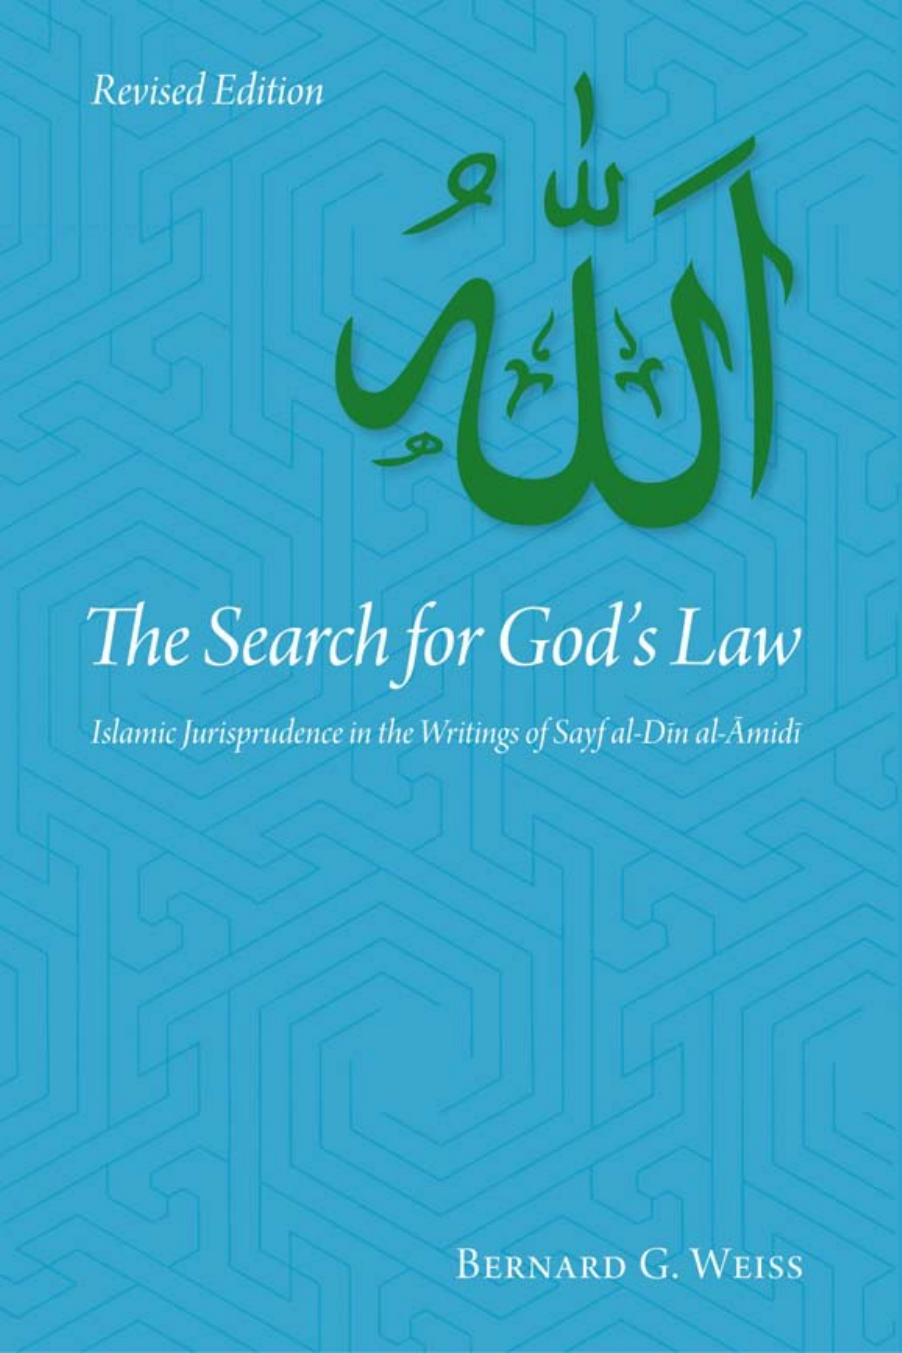 The Search for God's Law